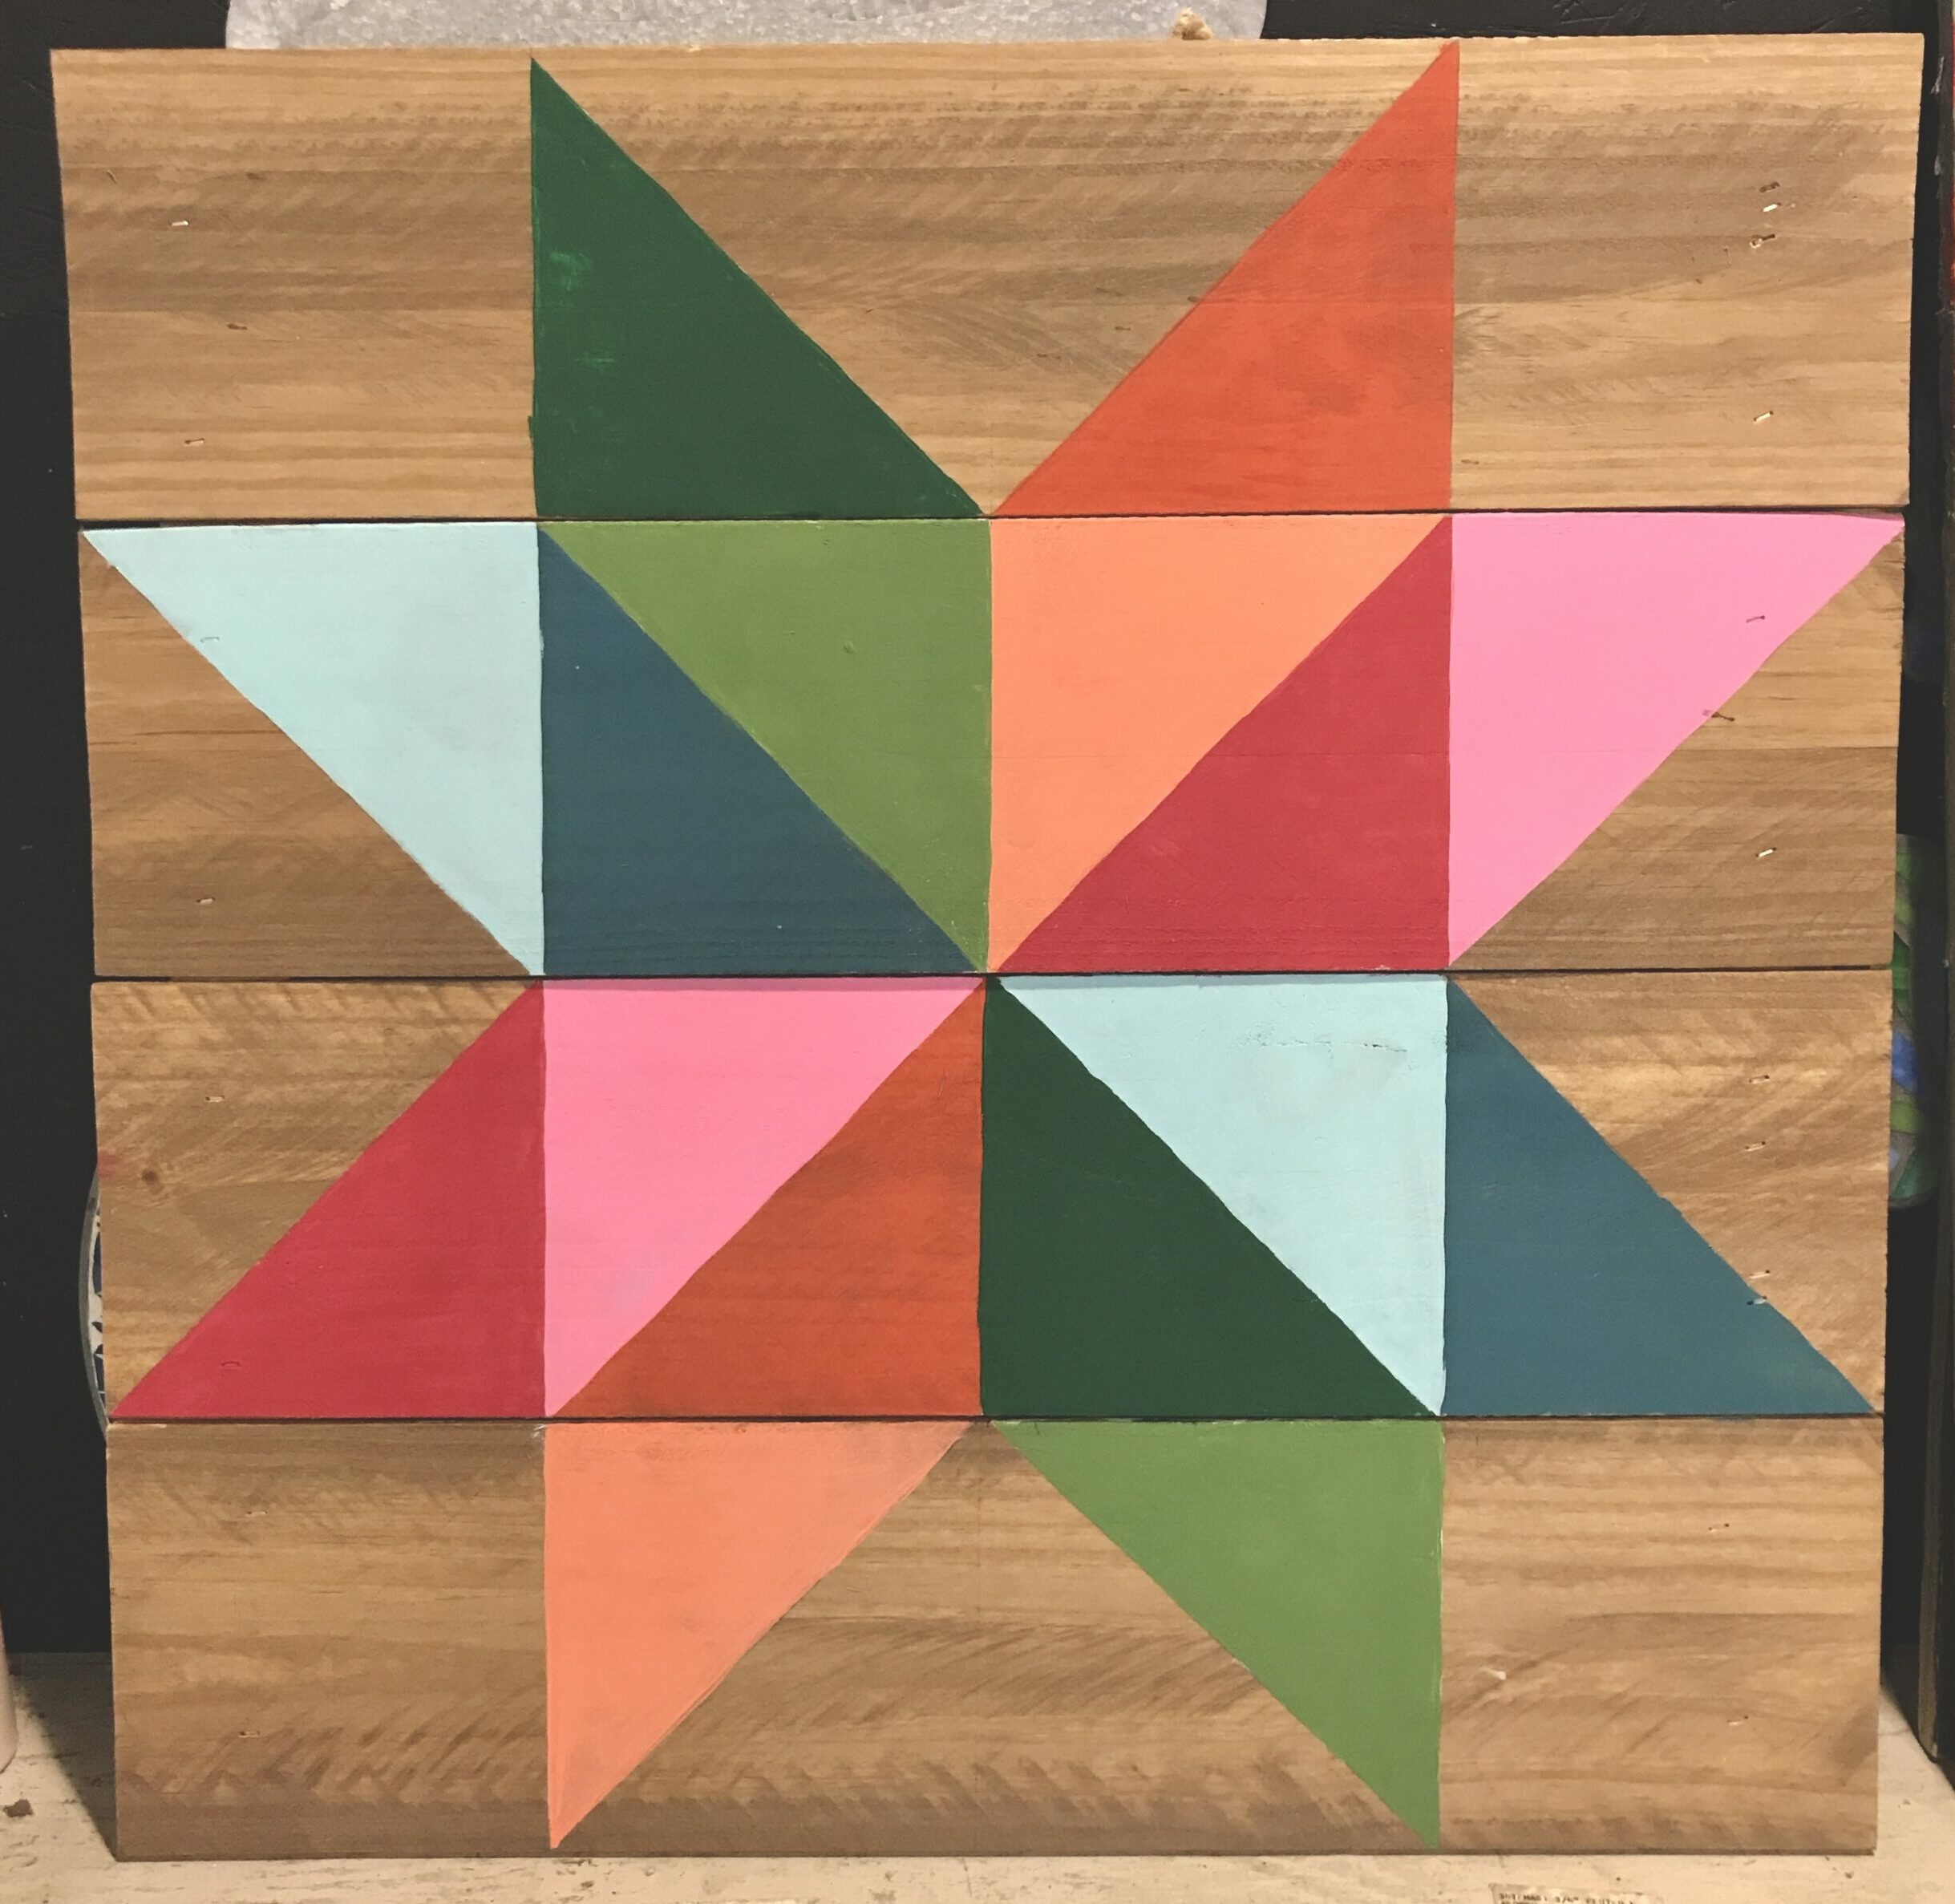 A wooden sign featuring green, red, pink, and orange paint that reveals a quilt-like pattern.